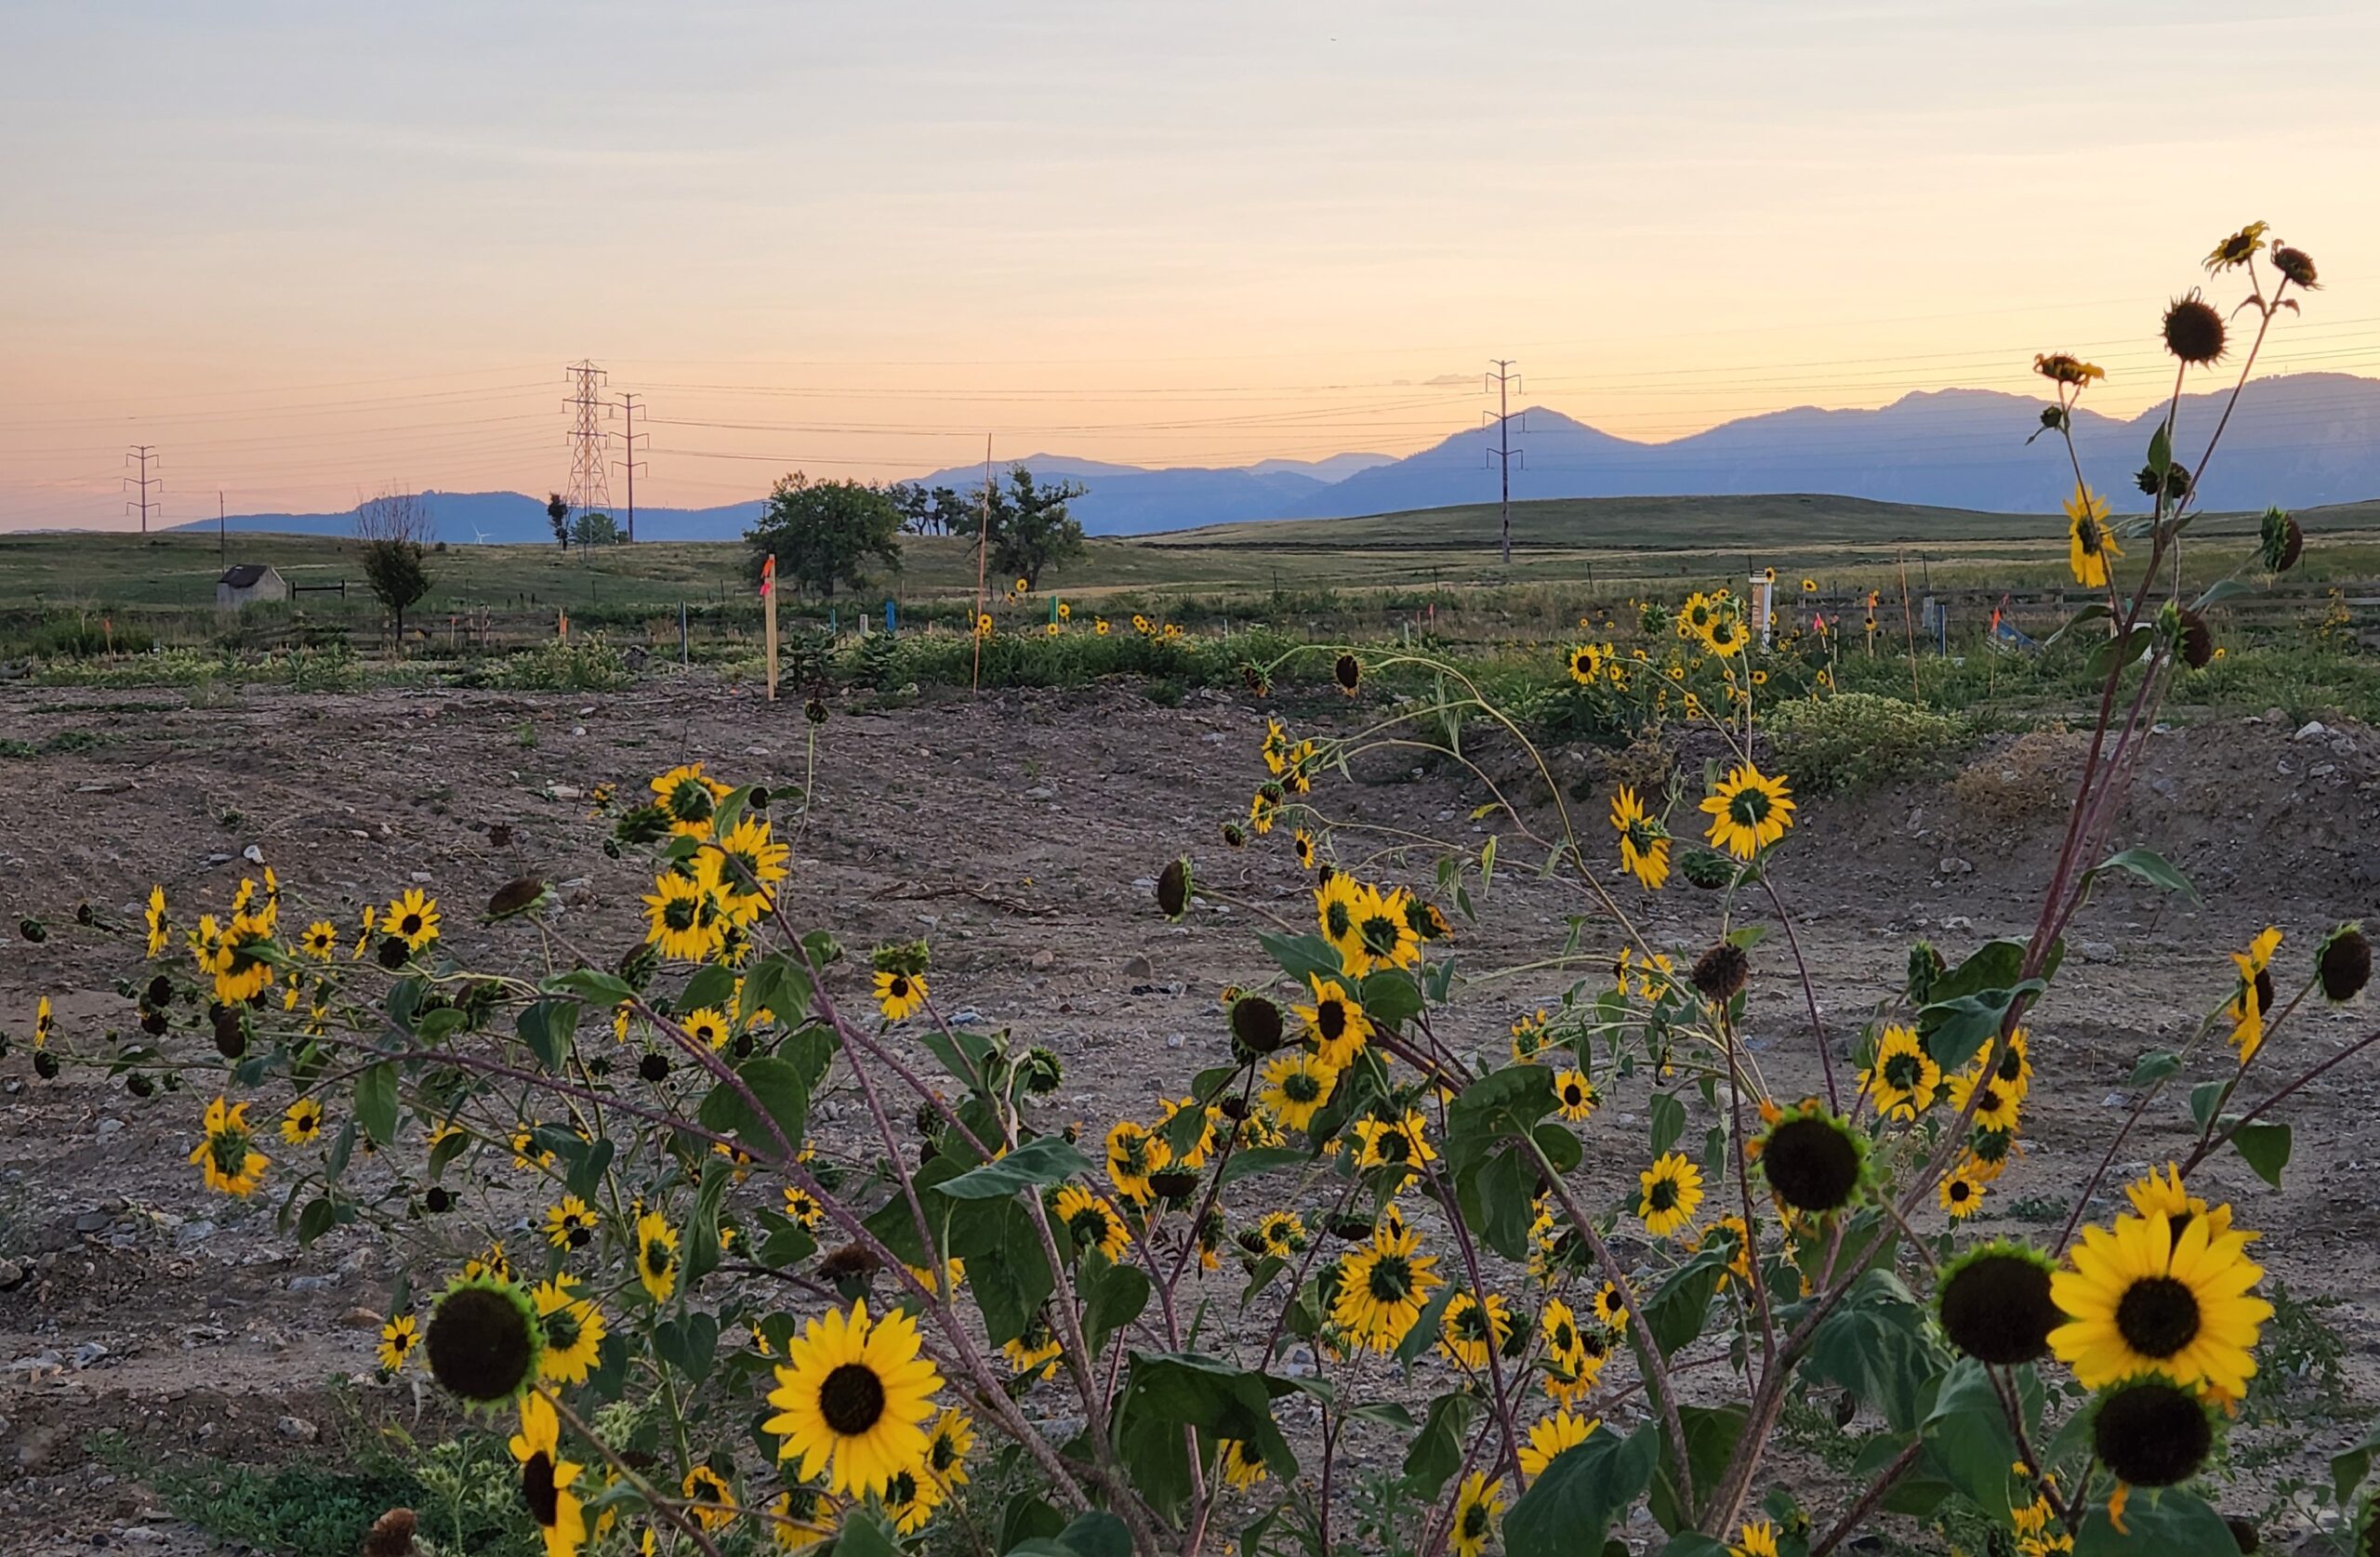 empty lot where house once stood with sunflowers in the foreground